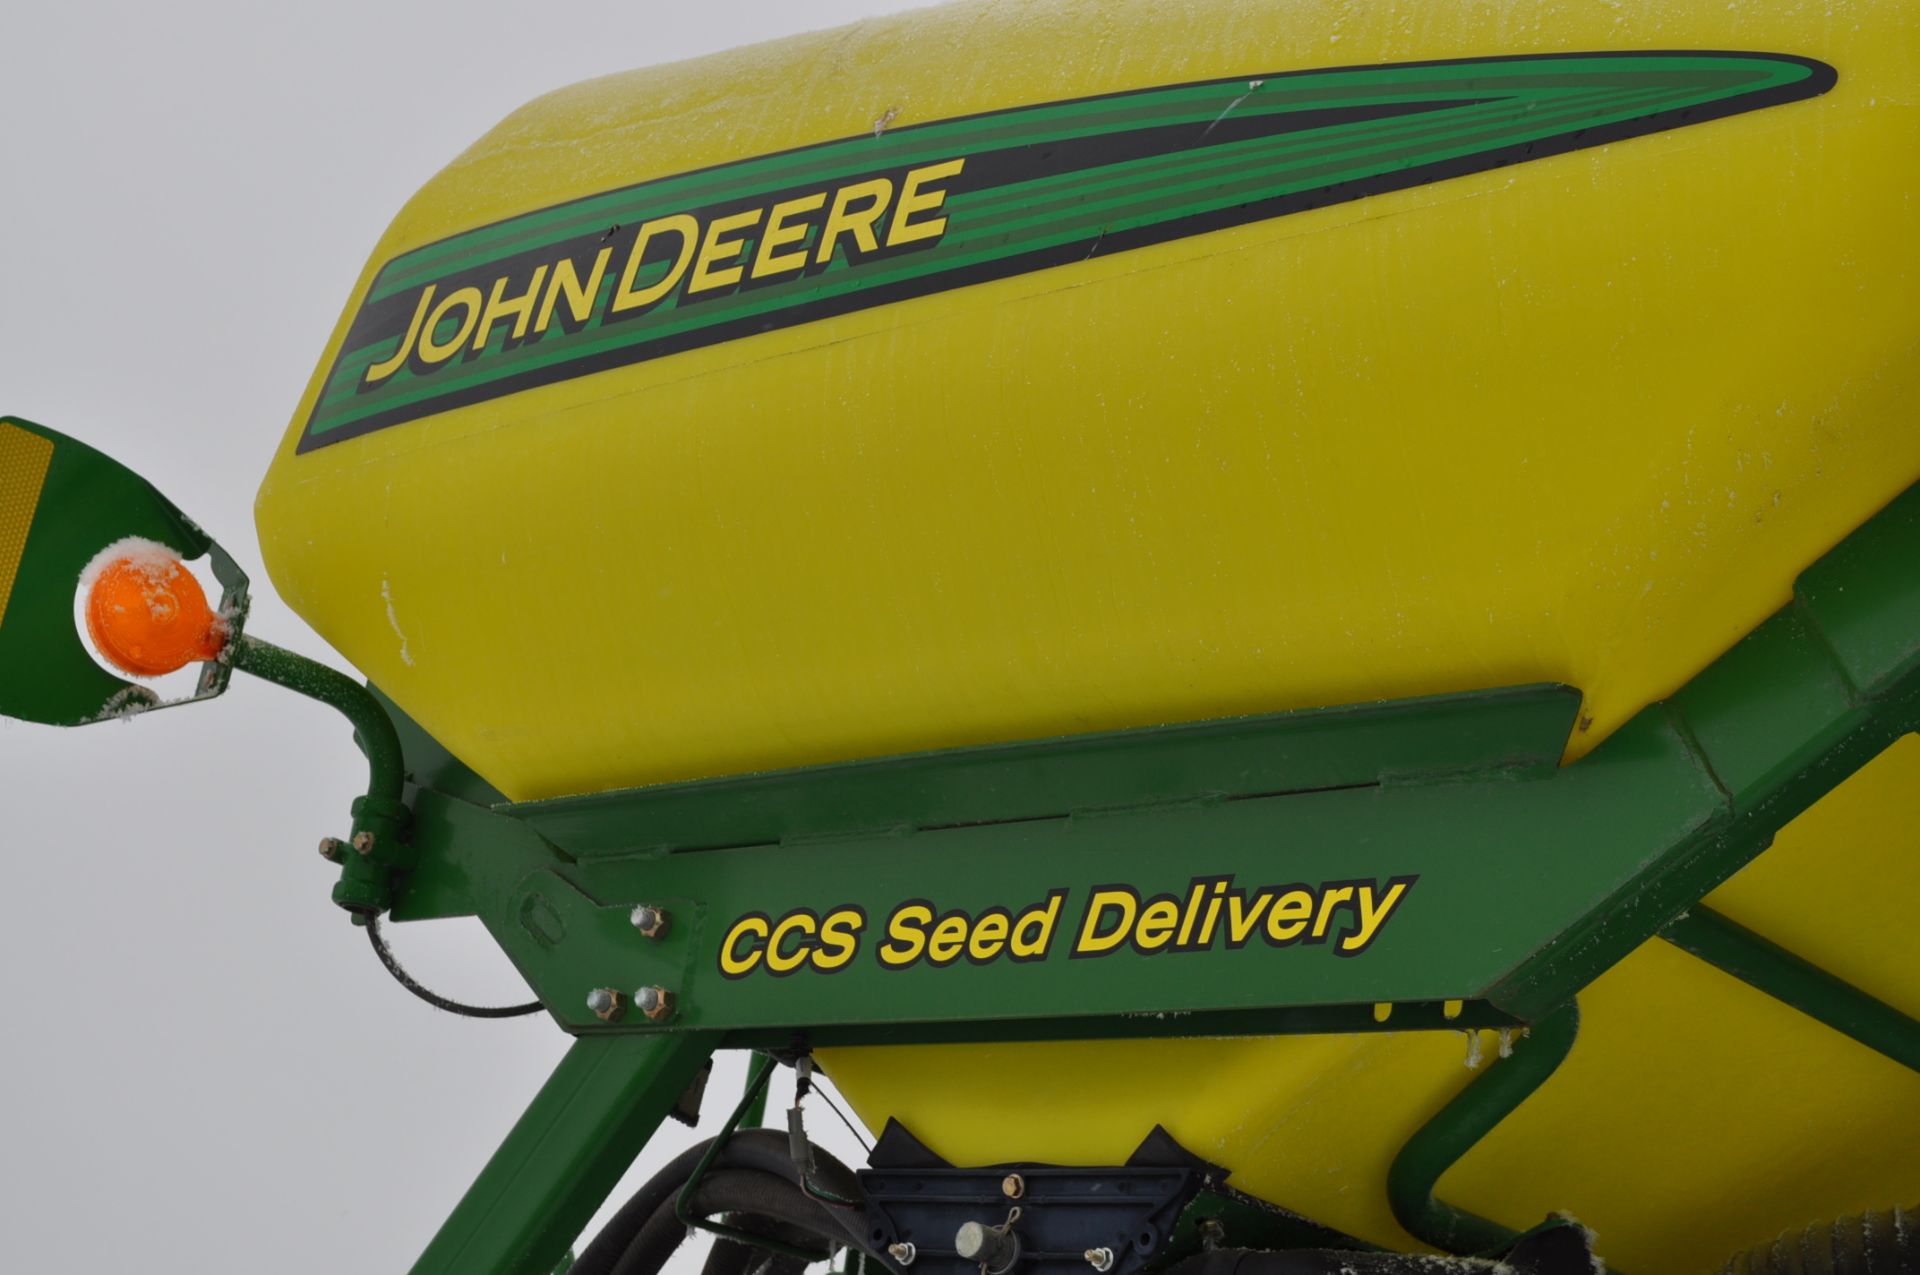 John Deere 1790 16/32 planter, CCS seed delivery, row cleaners, markers, seed firmers, SN 750247 - Image 10 of 14